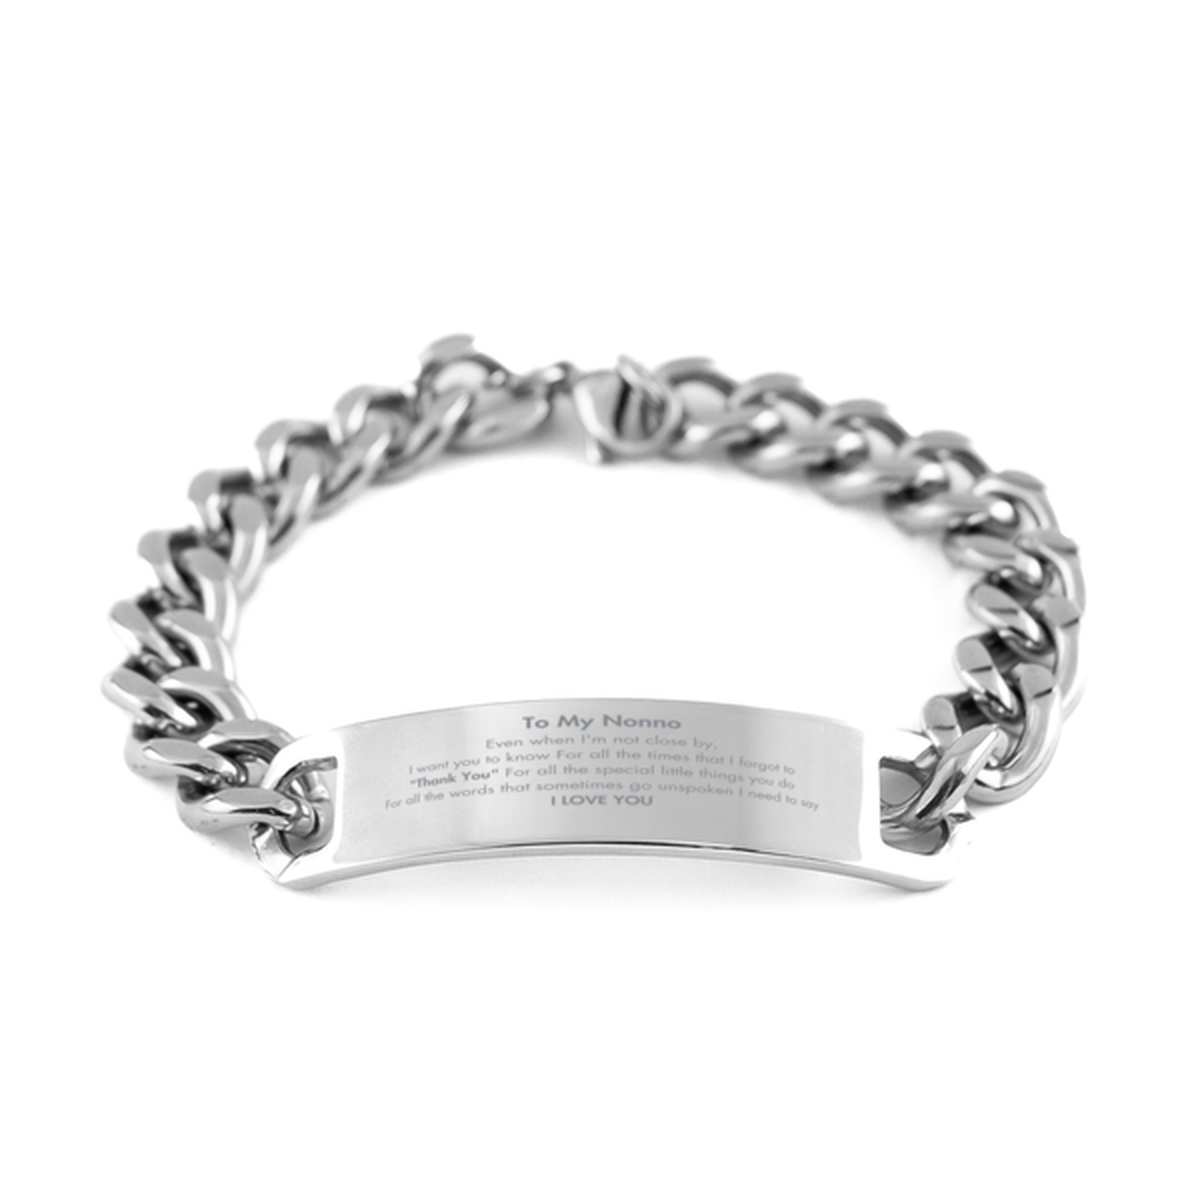 Thank You Gifts for Nonno, Keepsake Cuban Chain Stainless Steel Bracelet Gifts for Nonno Birthday Mother's day Father's Day Nonno For all the words That sometimes go unspoken I need to say I LOVE YOU